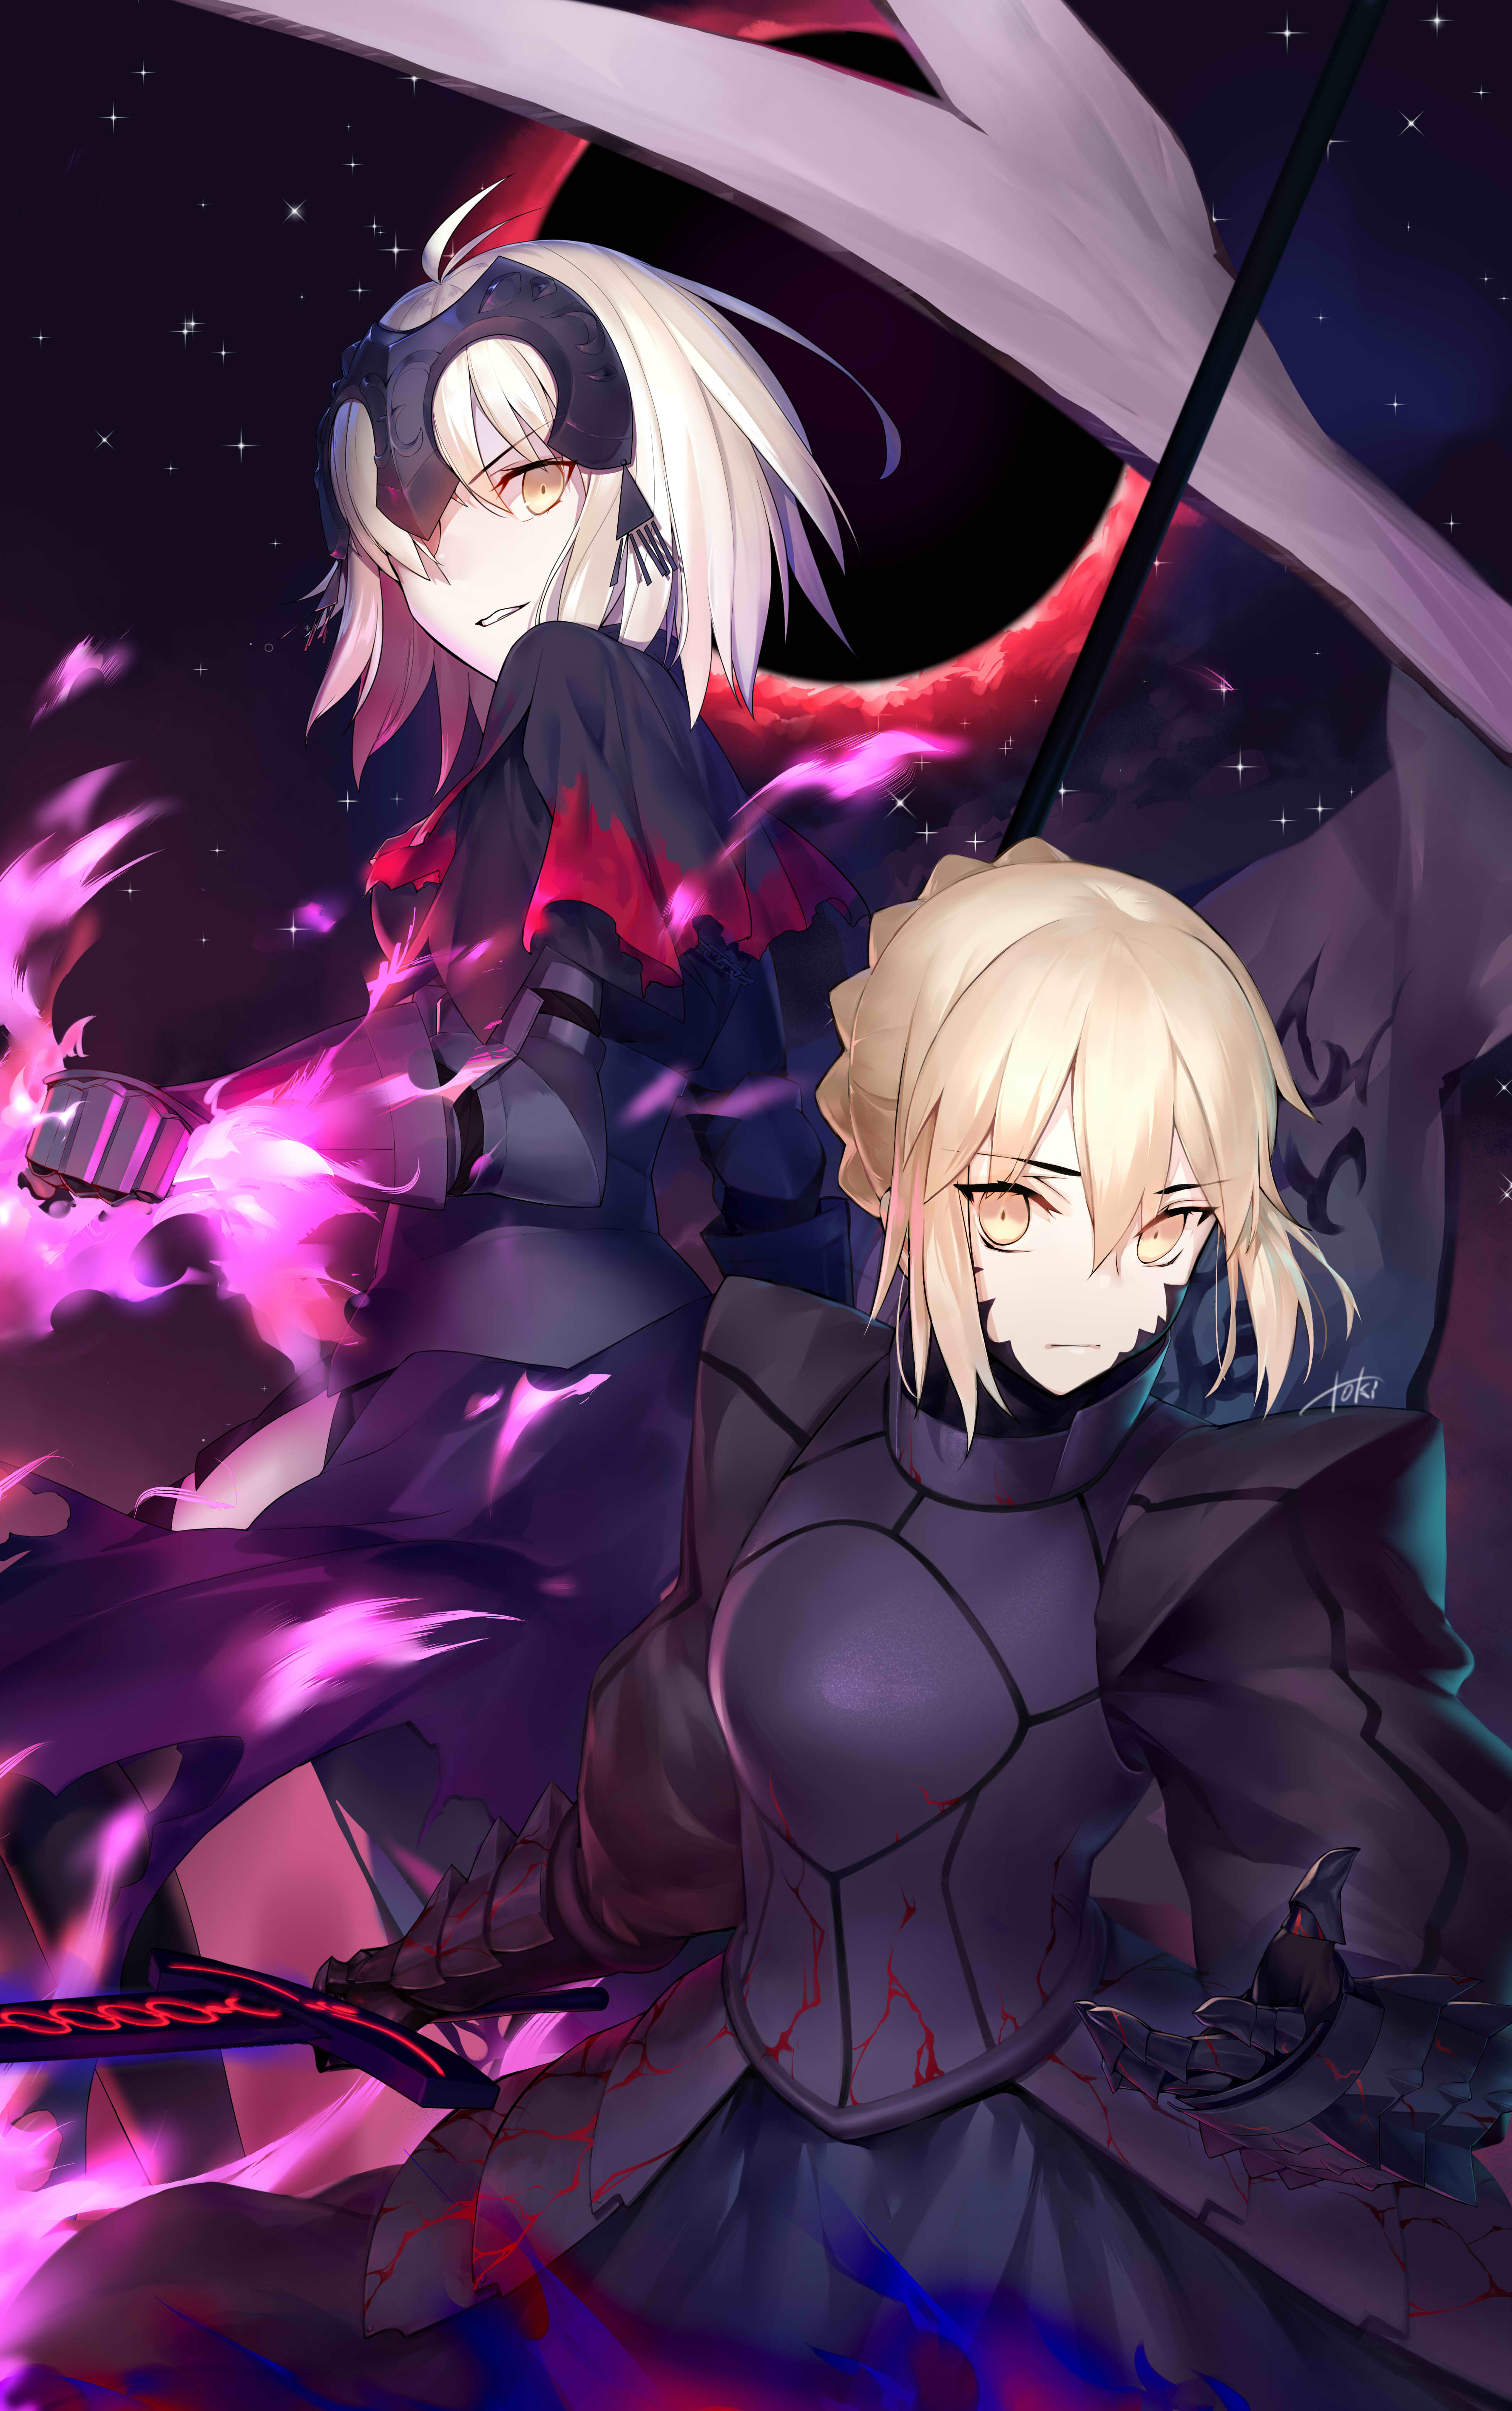 Fate/Grand Order Art by 東々